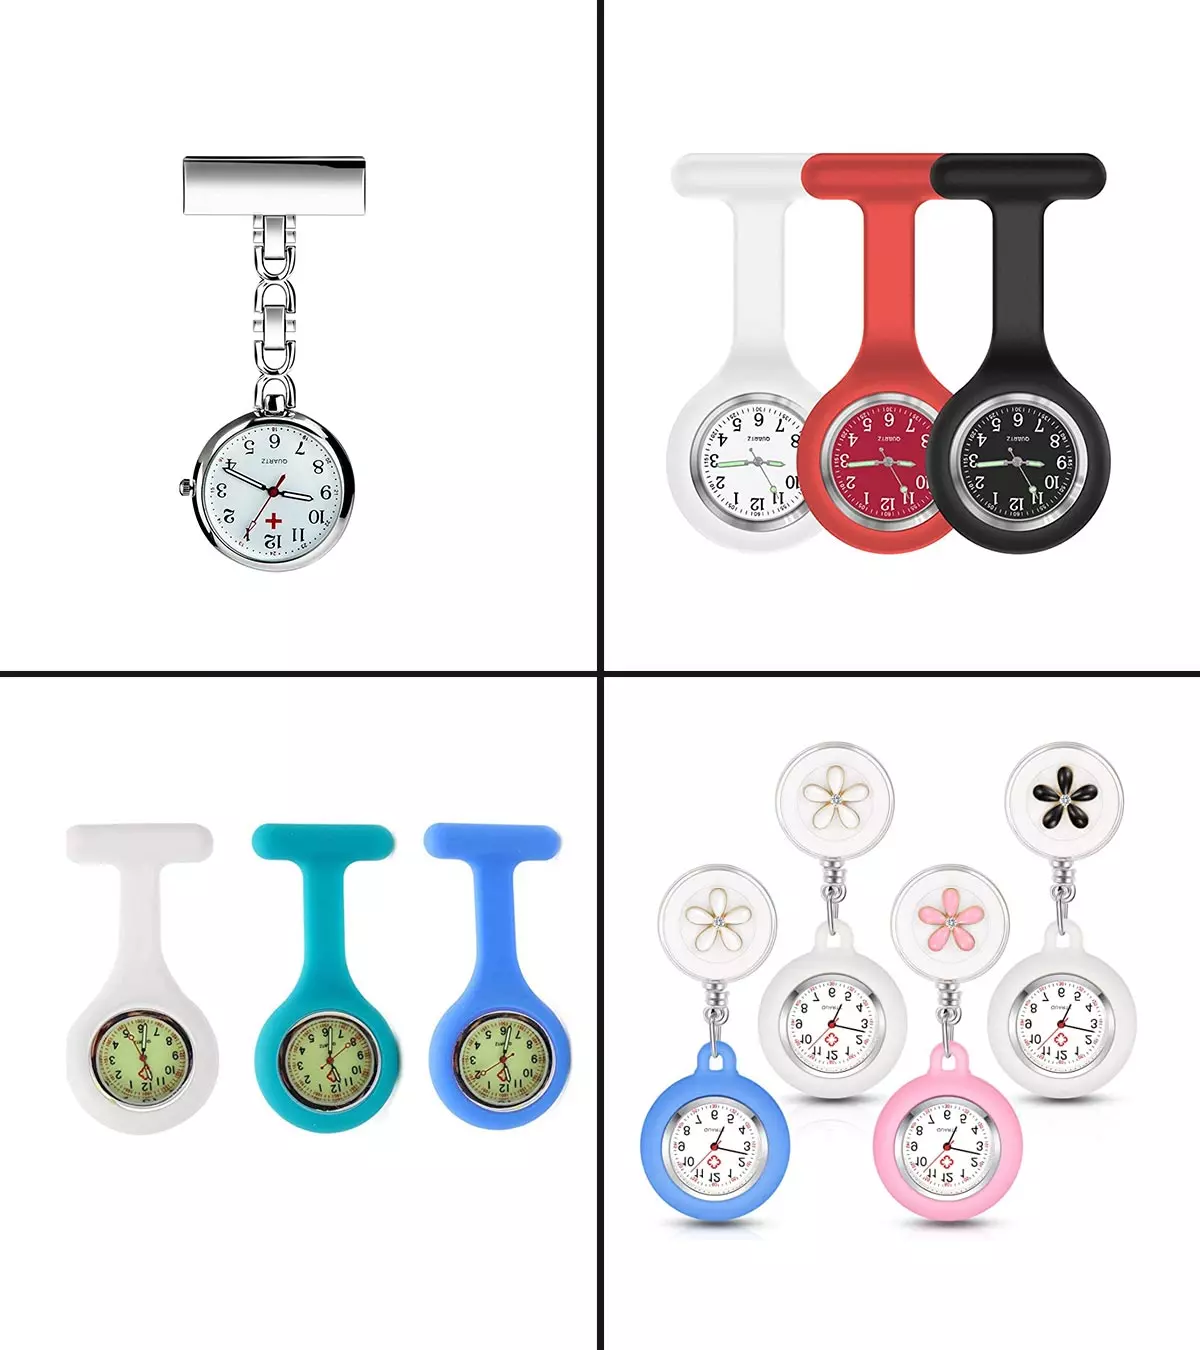 Wear them or carry them in the pocket, these watches are the perfect choice for medical professionals.